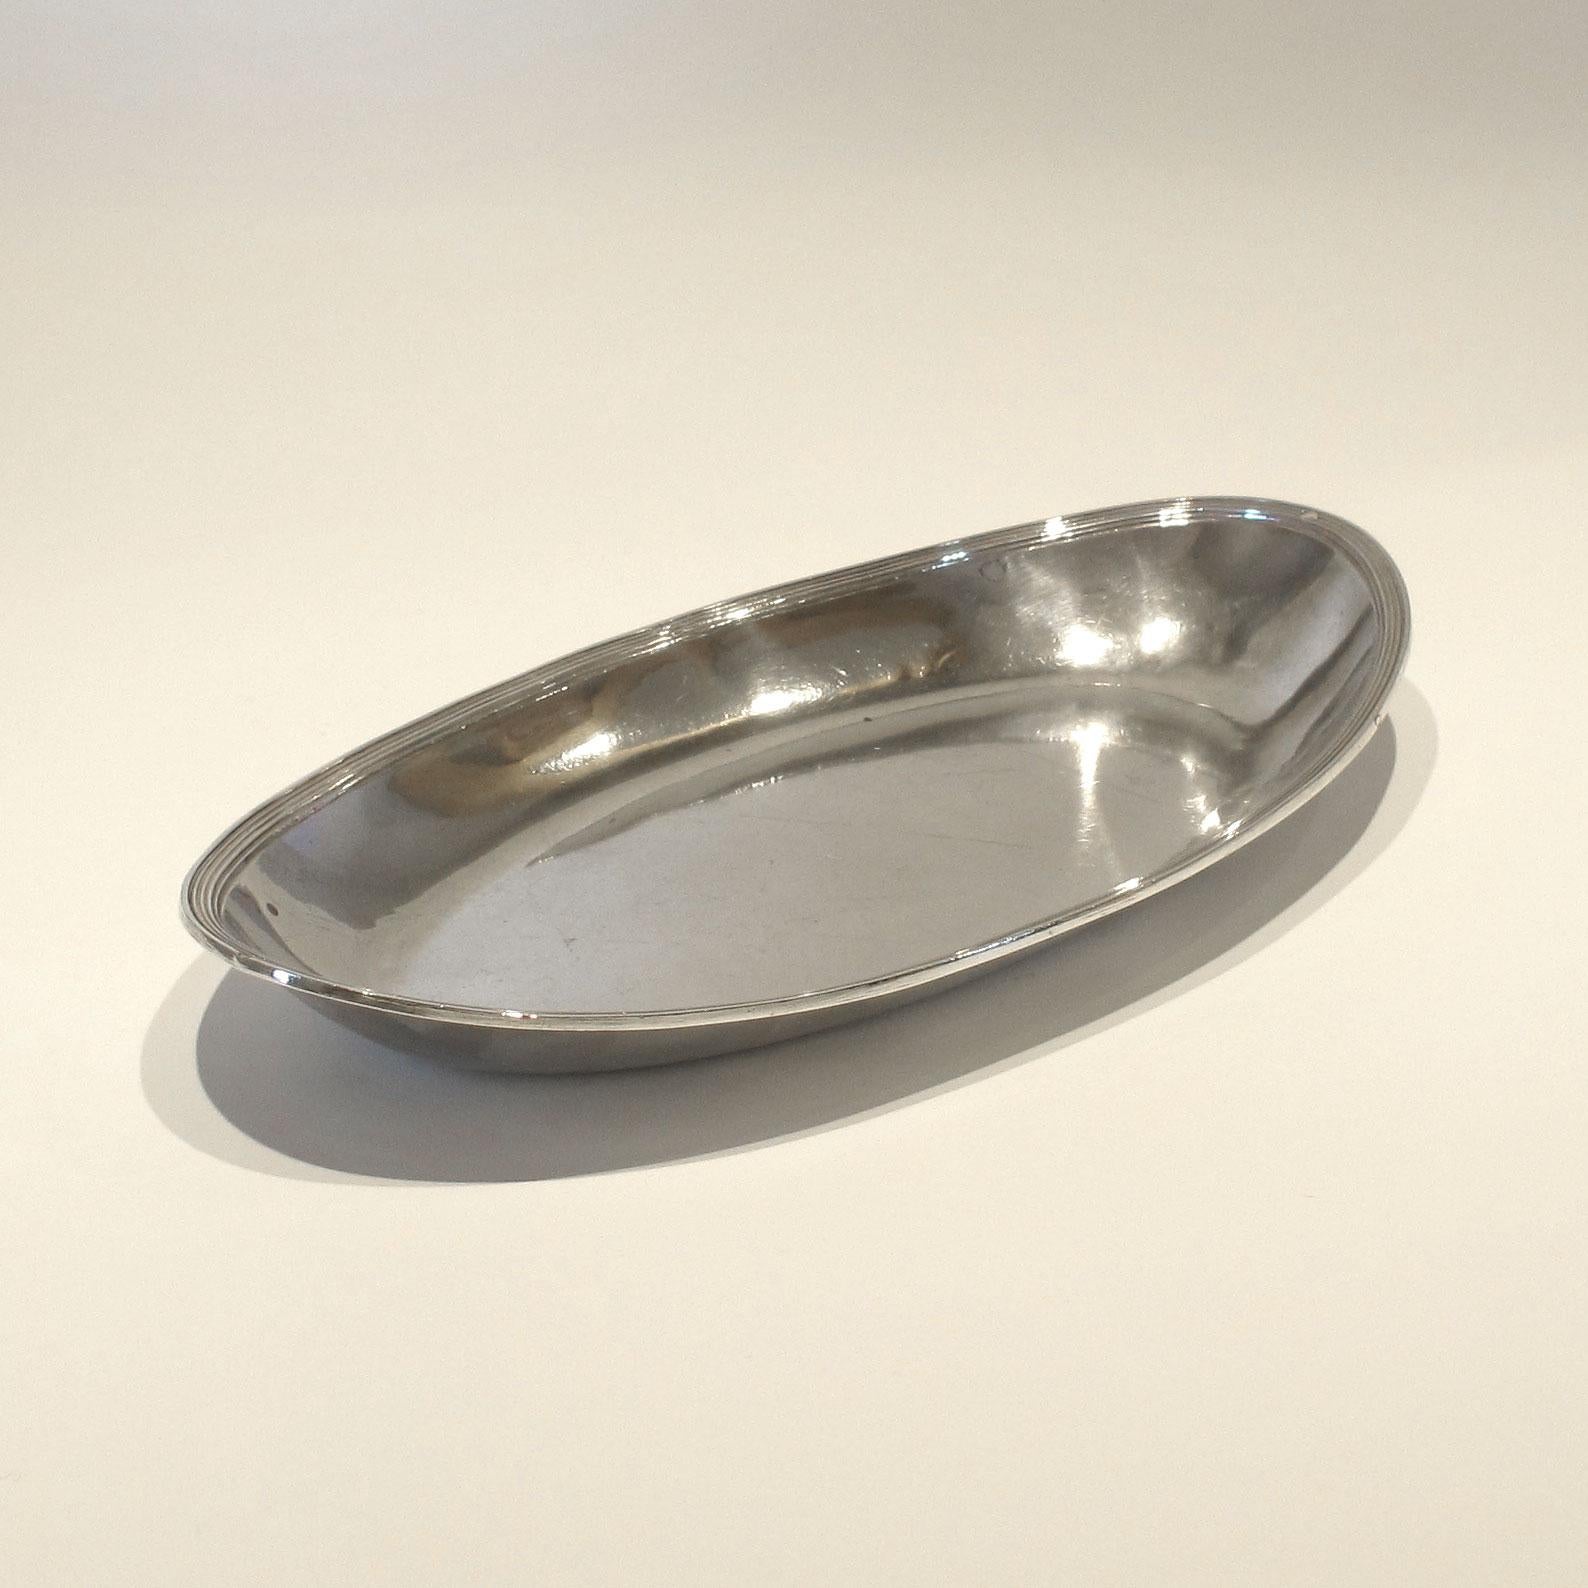 Continental silver oval dish or tray – perfect for serving drinks or dressing-table tray.